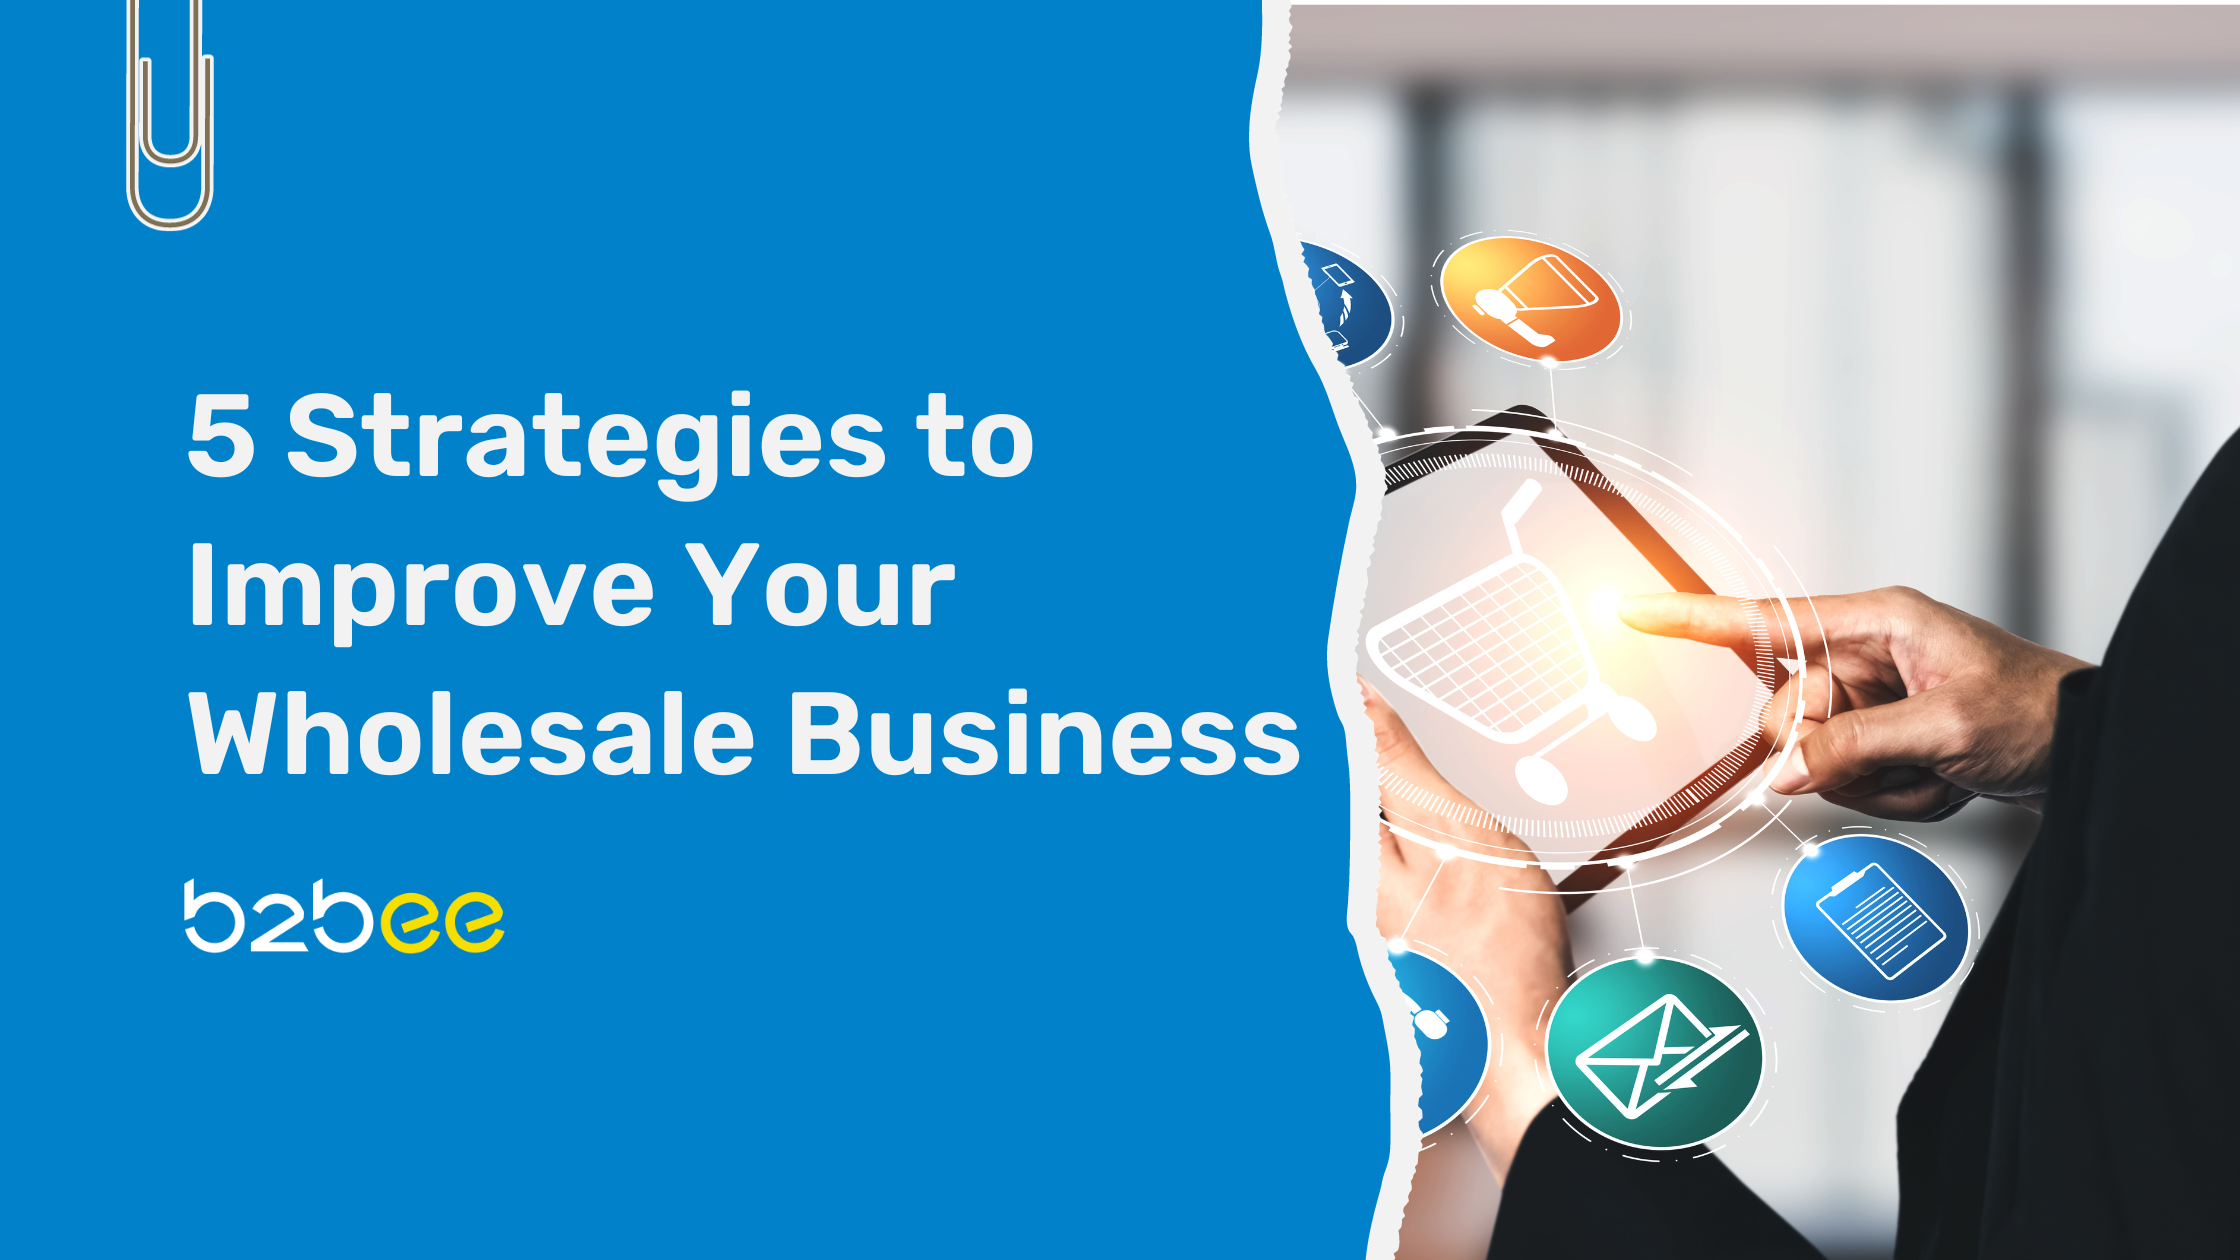 5 Strategies to Improve Your Wholesale Business